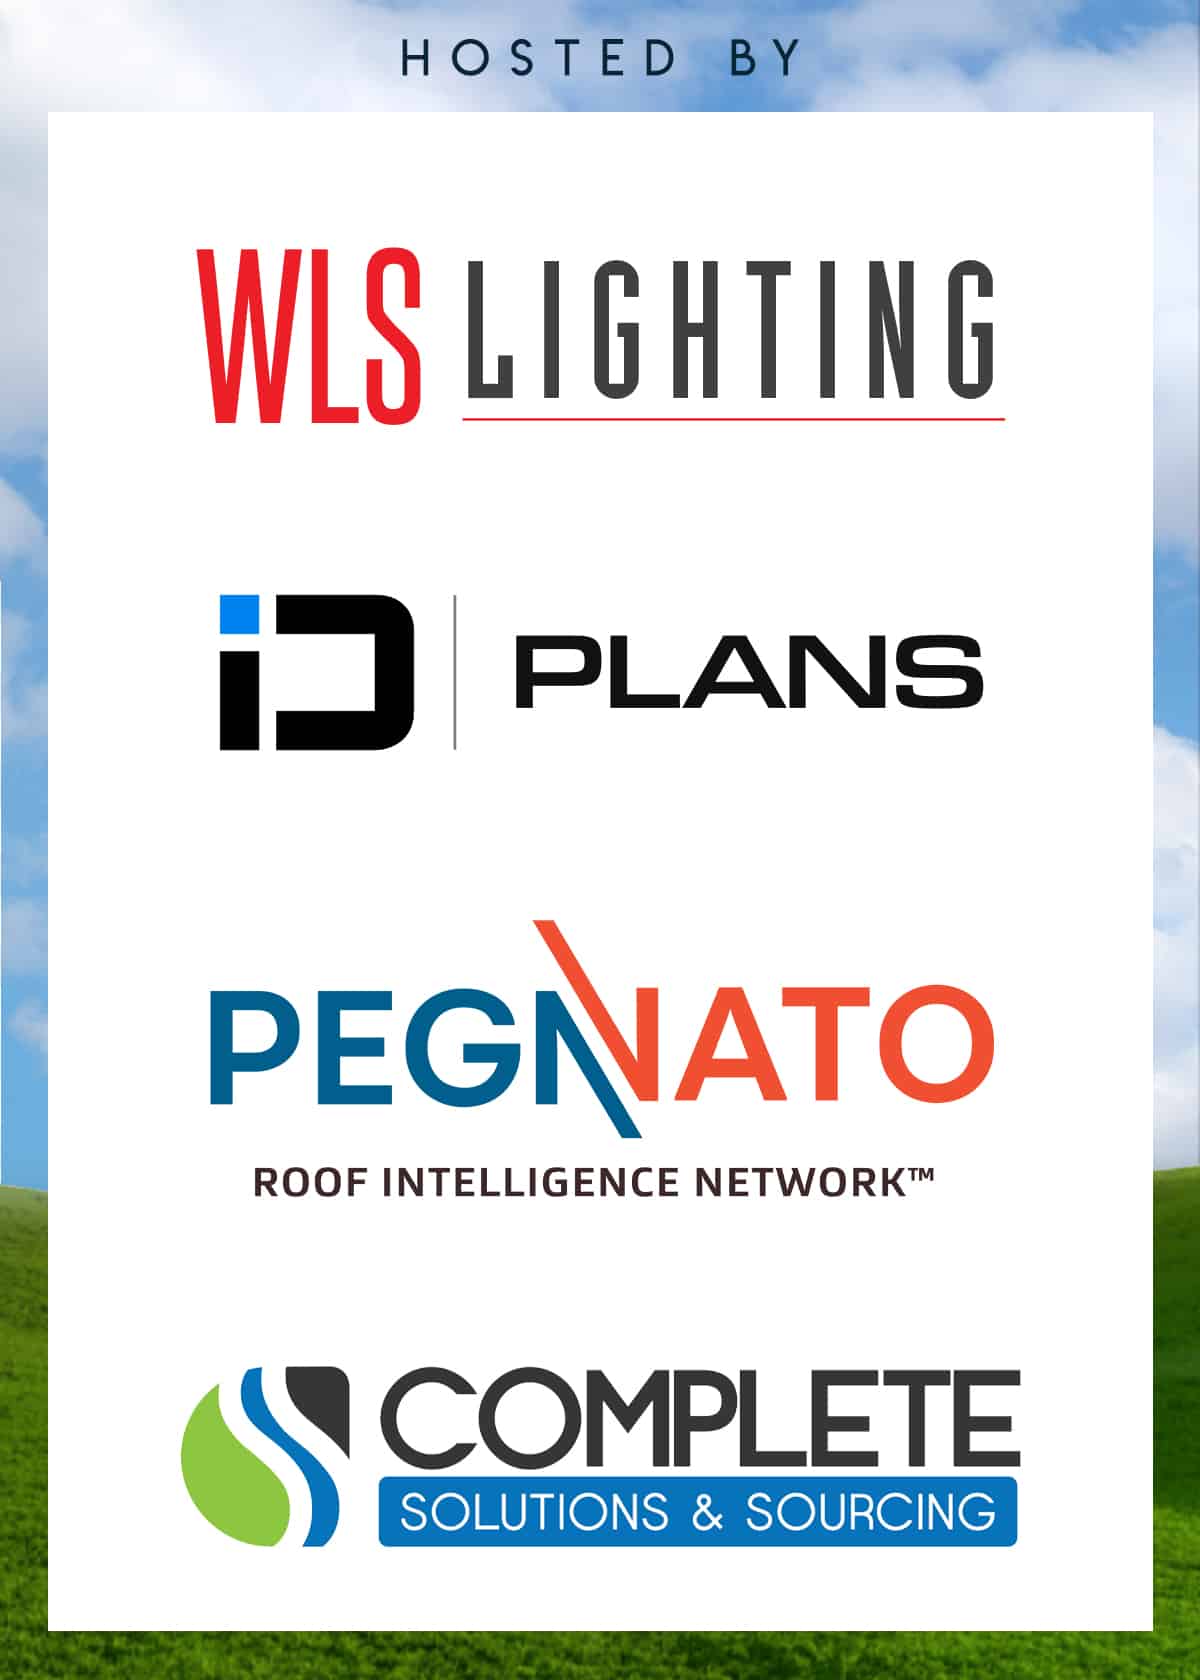 Booth Invite Back With Logos Copy - WLS Lighting Systems